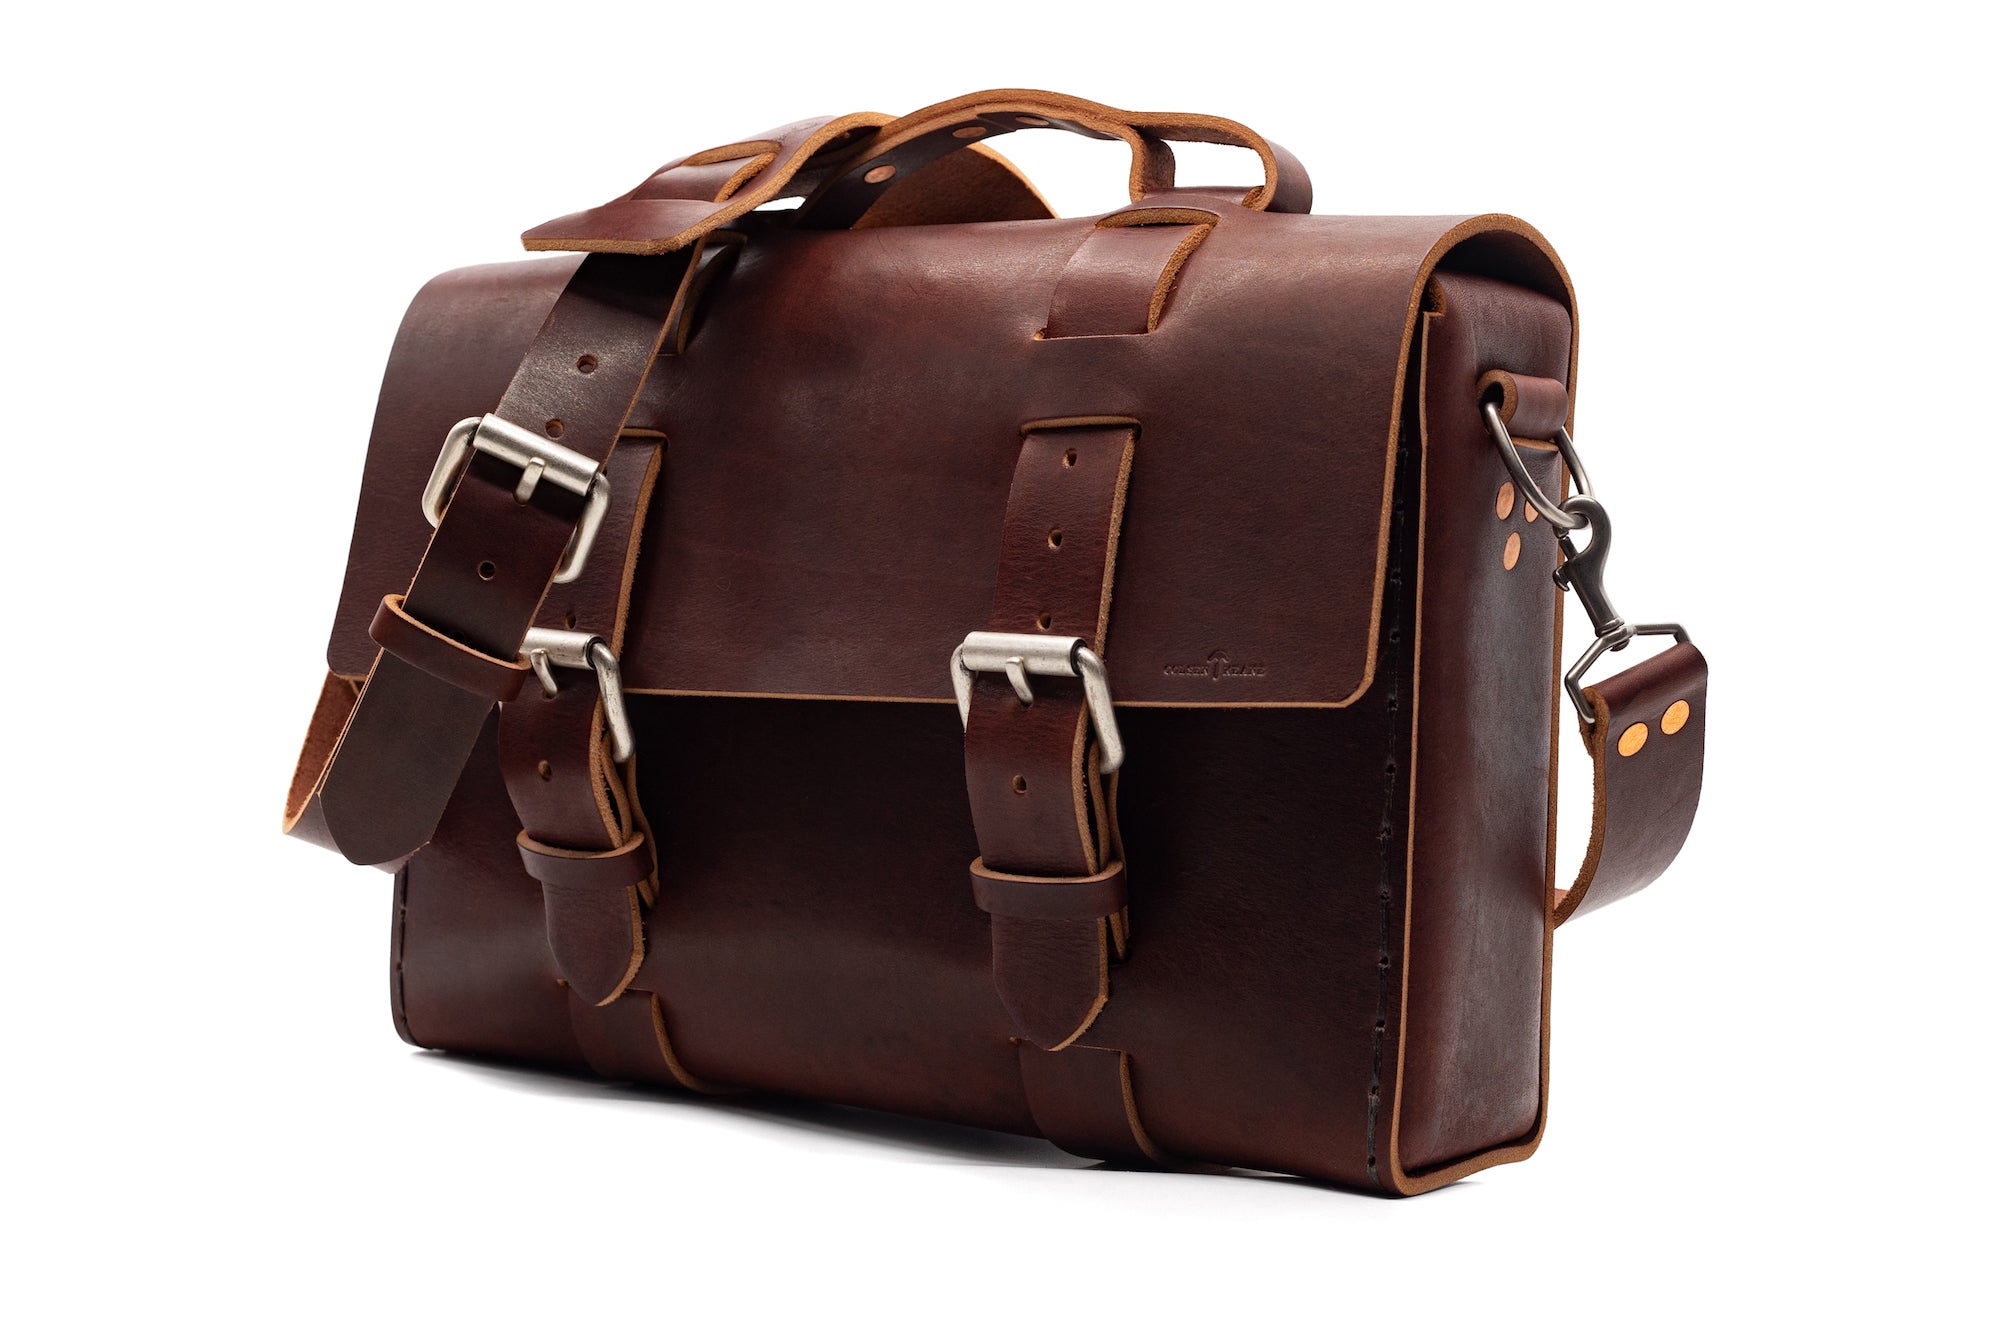 Limited Edition No. 4313 - Minimalist Standard Leather Satchel in Bay St. Brown - ONLY 1 AVAILABLE